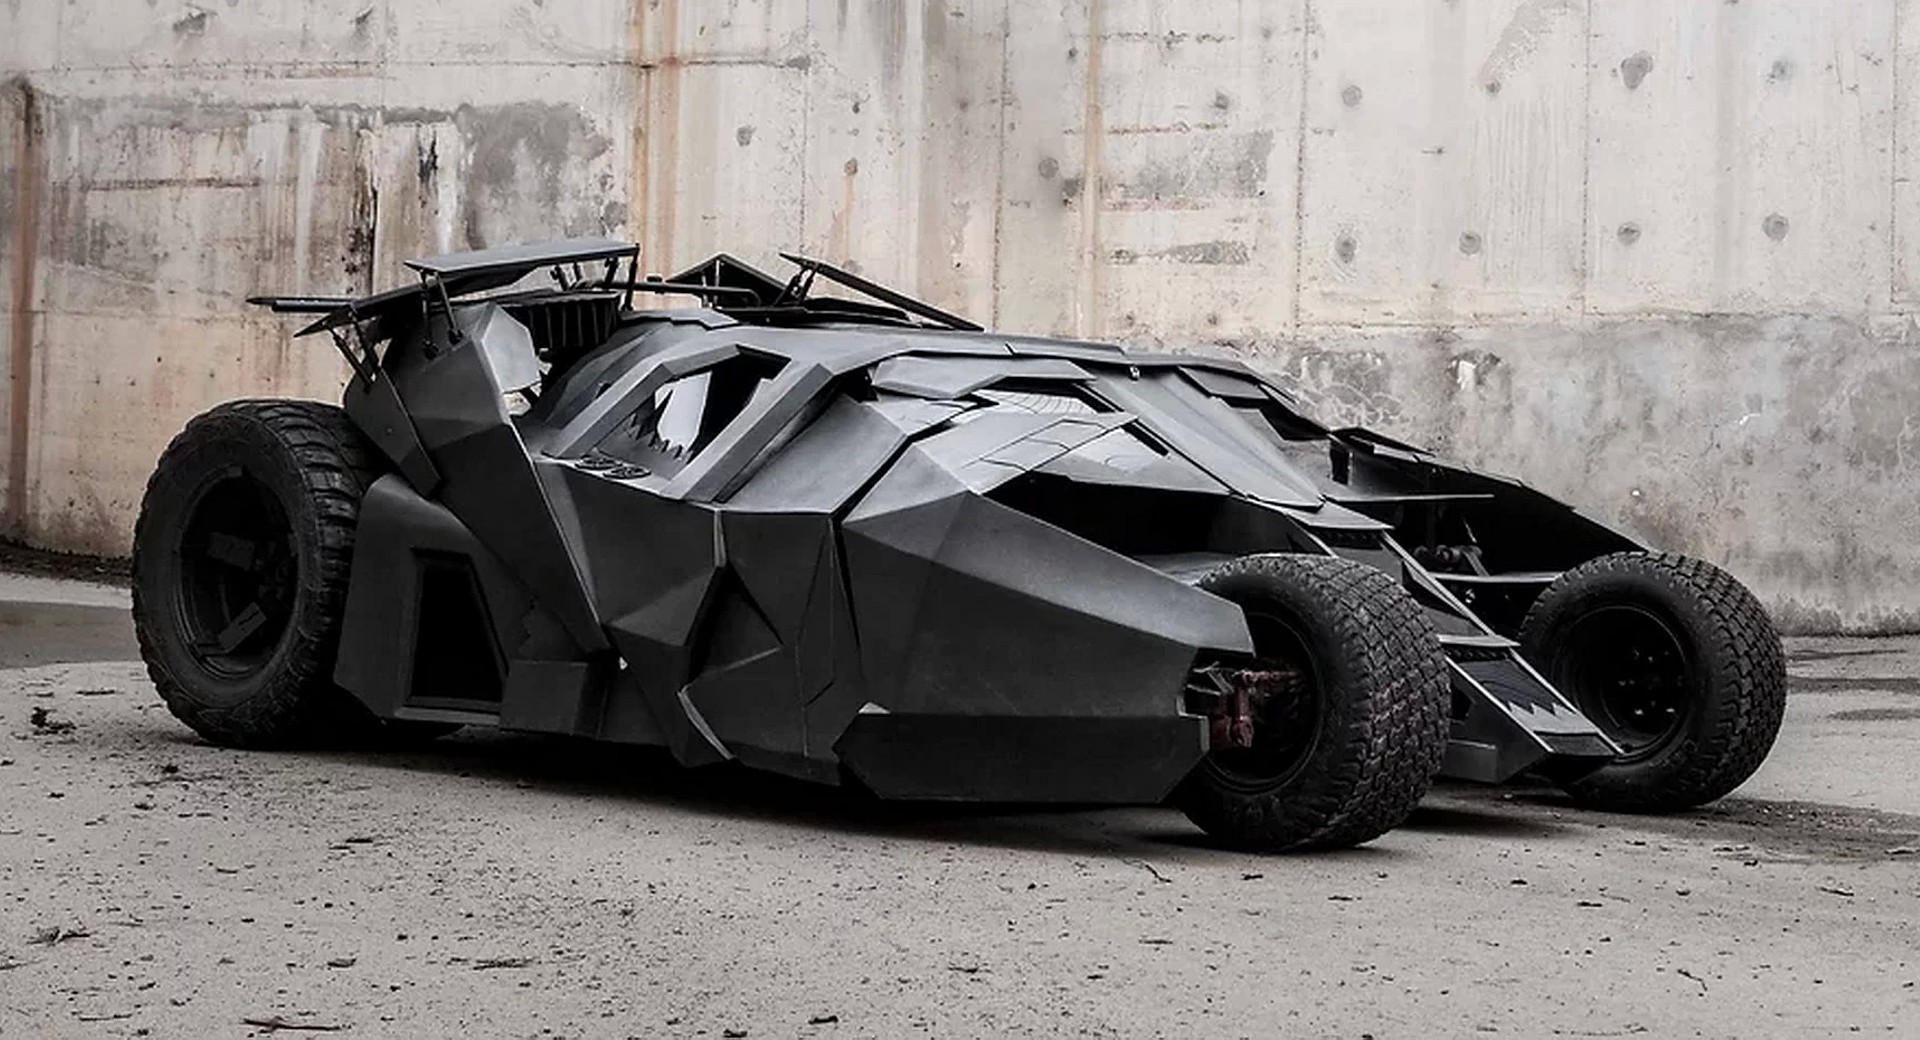 https://www.carscoops.com/wp-content/uploads/2022/02/The-Electric-Batmobile-main.jpg